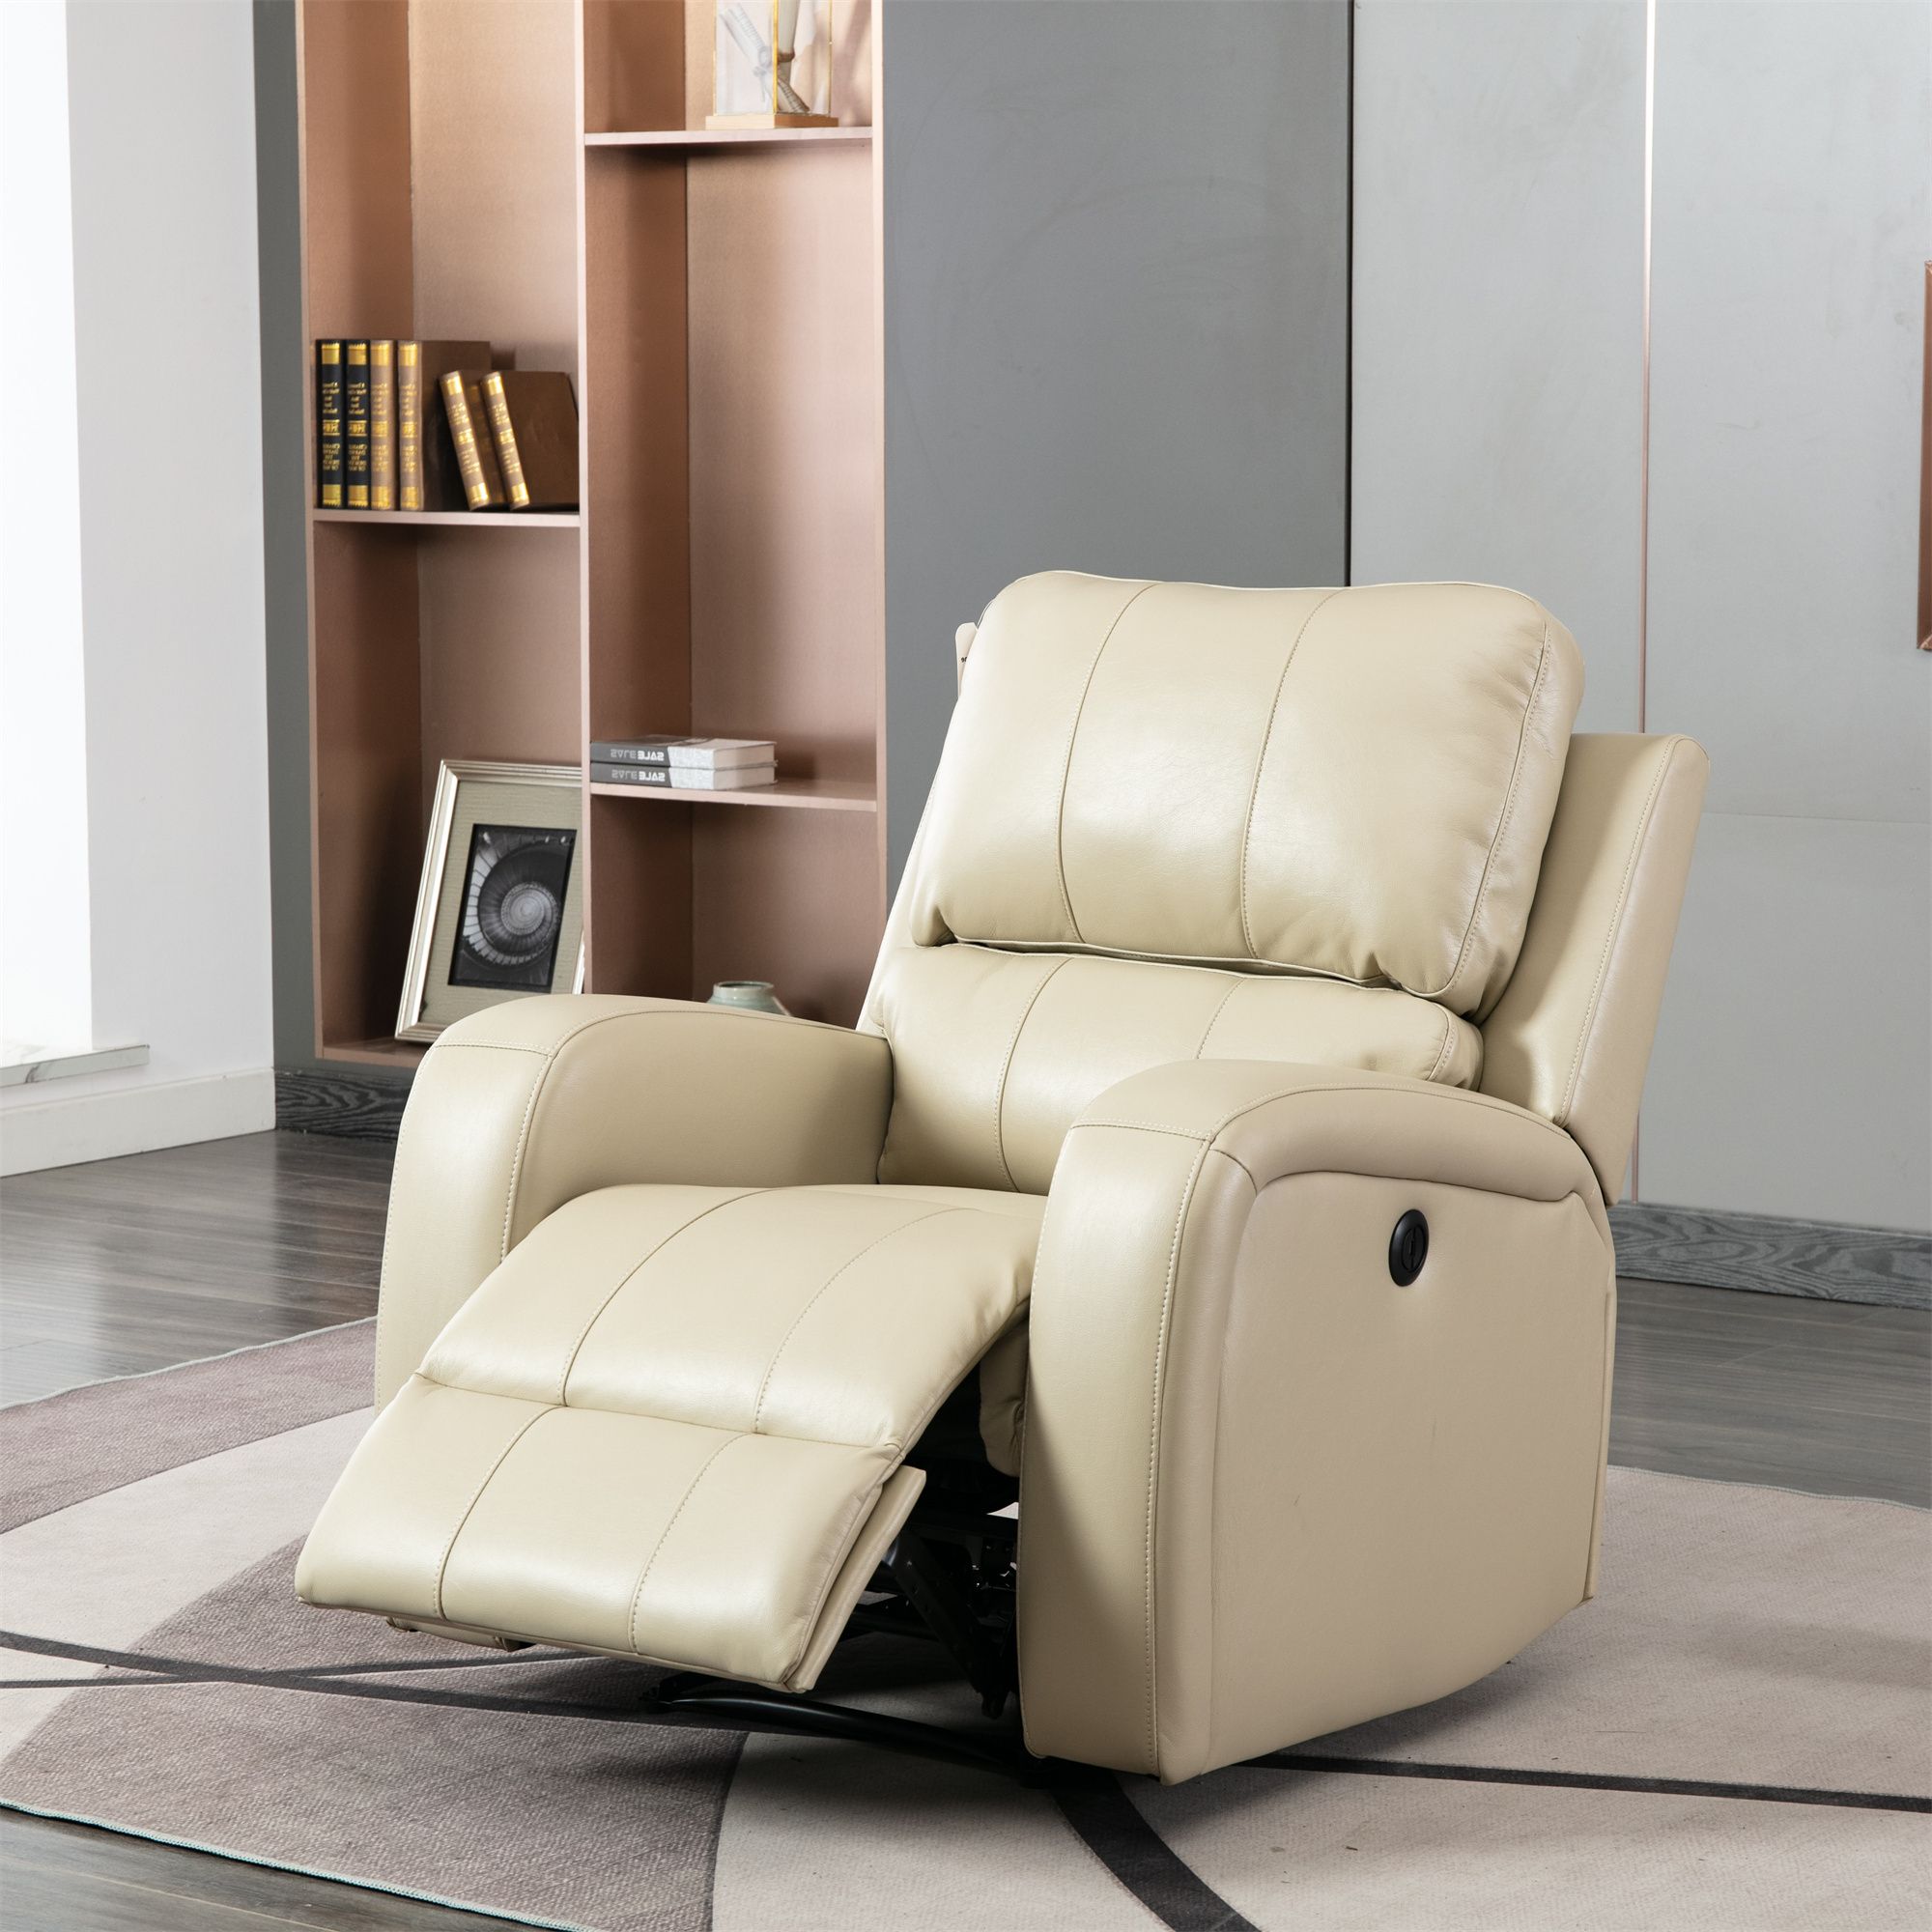 Best And Newest Power Lift Chair Electric Recliner Sofa For Elderly,comfortable Air With Regard To Black Faux Leather Usb Charging Ottomans (View 9 of 10)